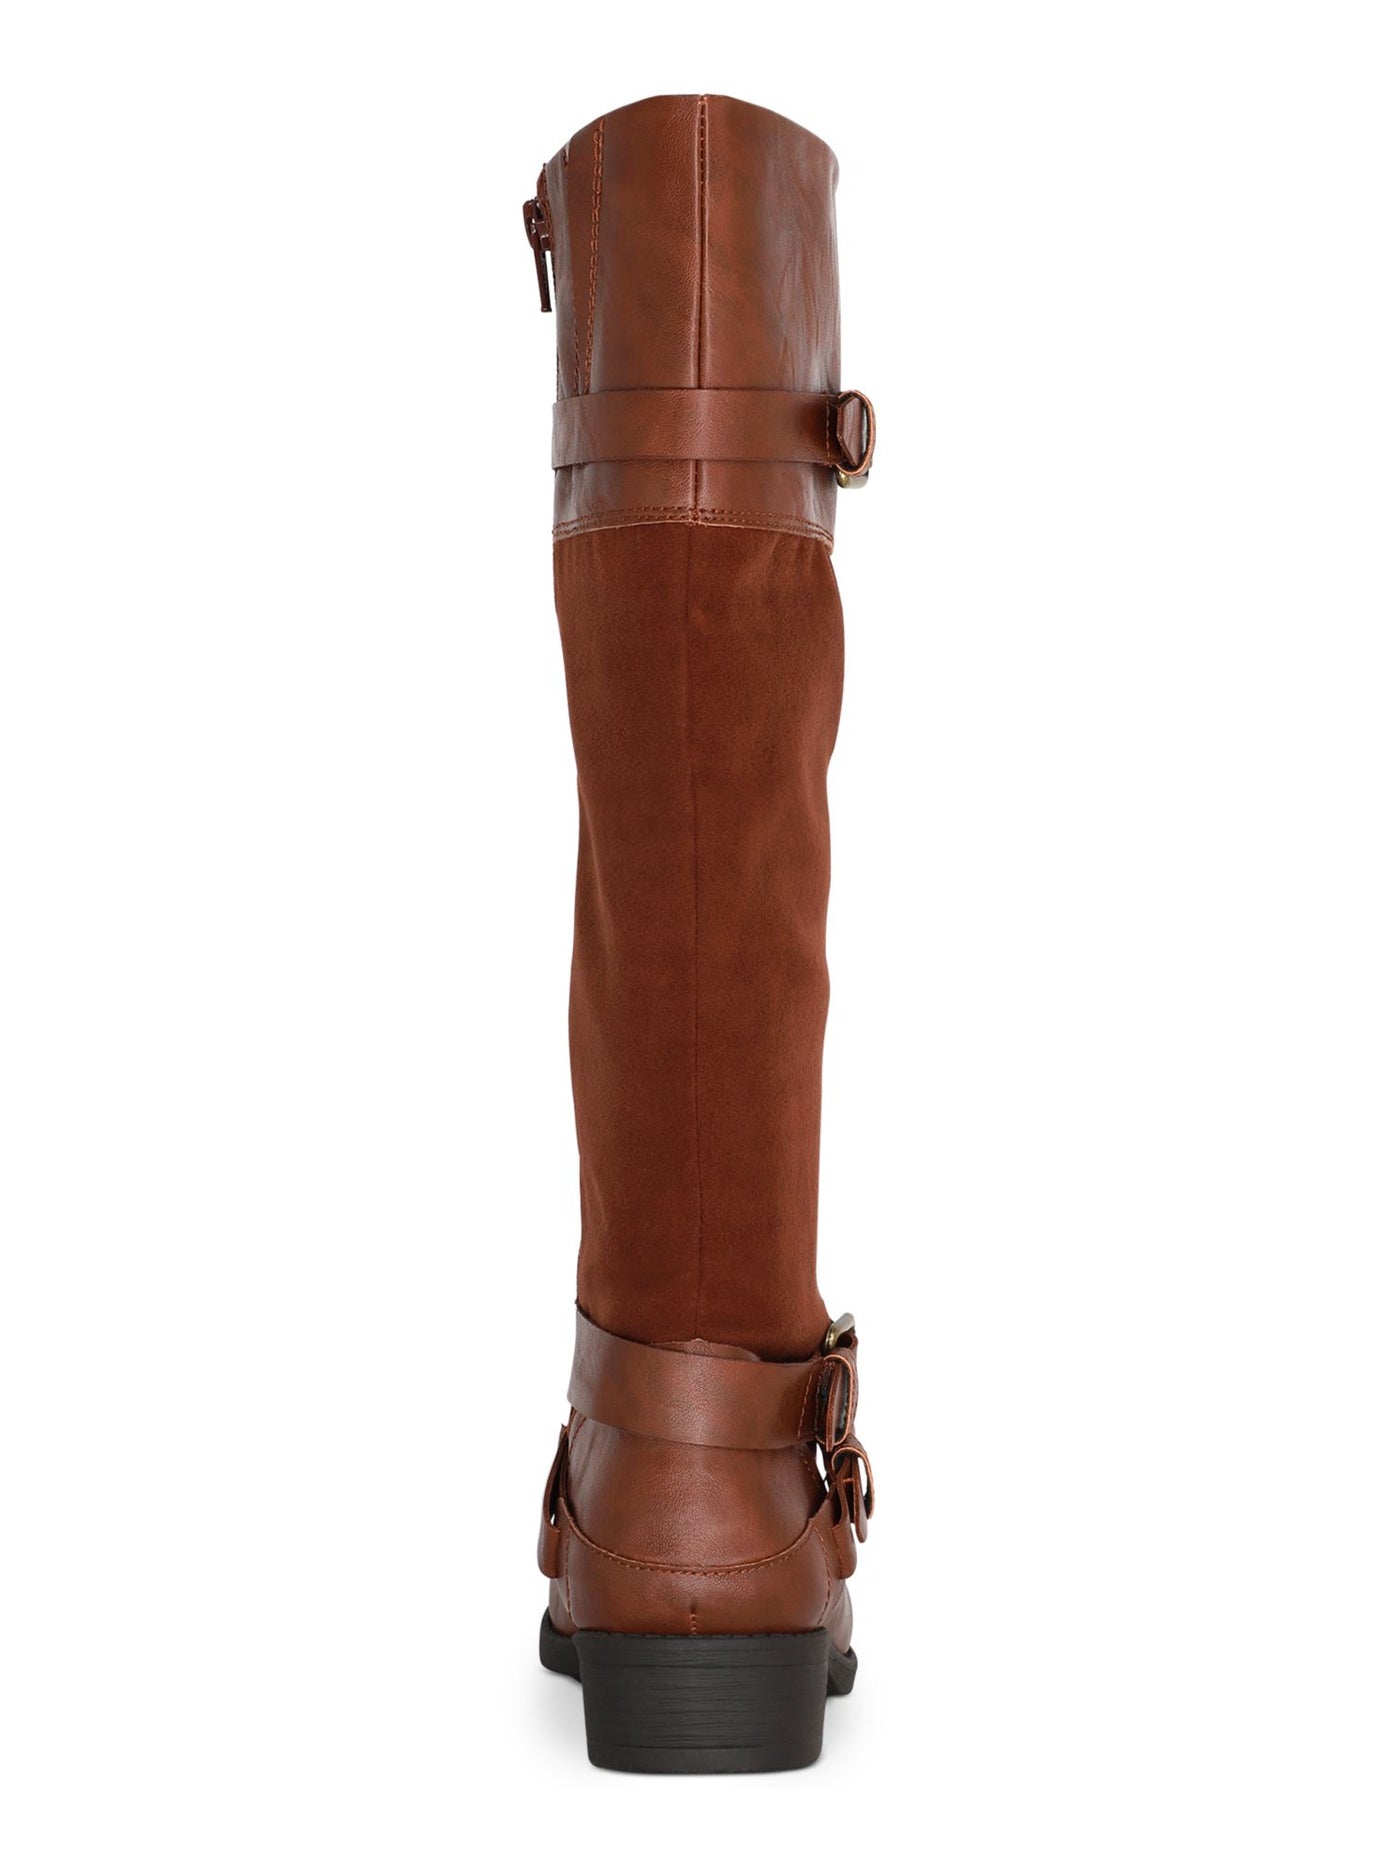 STYLE & COMPANY Womens Brown Buckle Accent Padded Ashliie Round Toe Block Heel Zip-Up Riding Boot 6.5 M